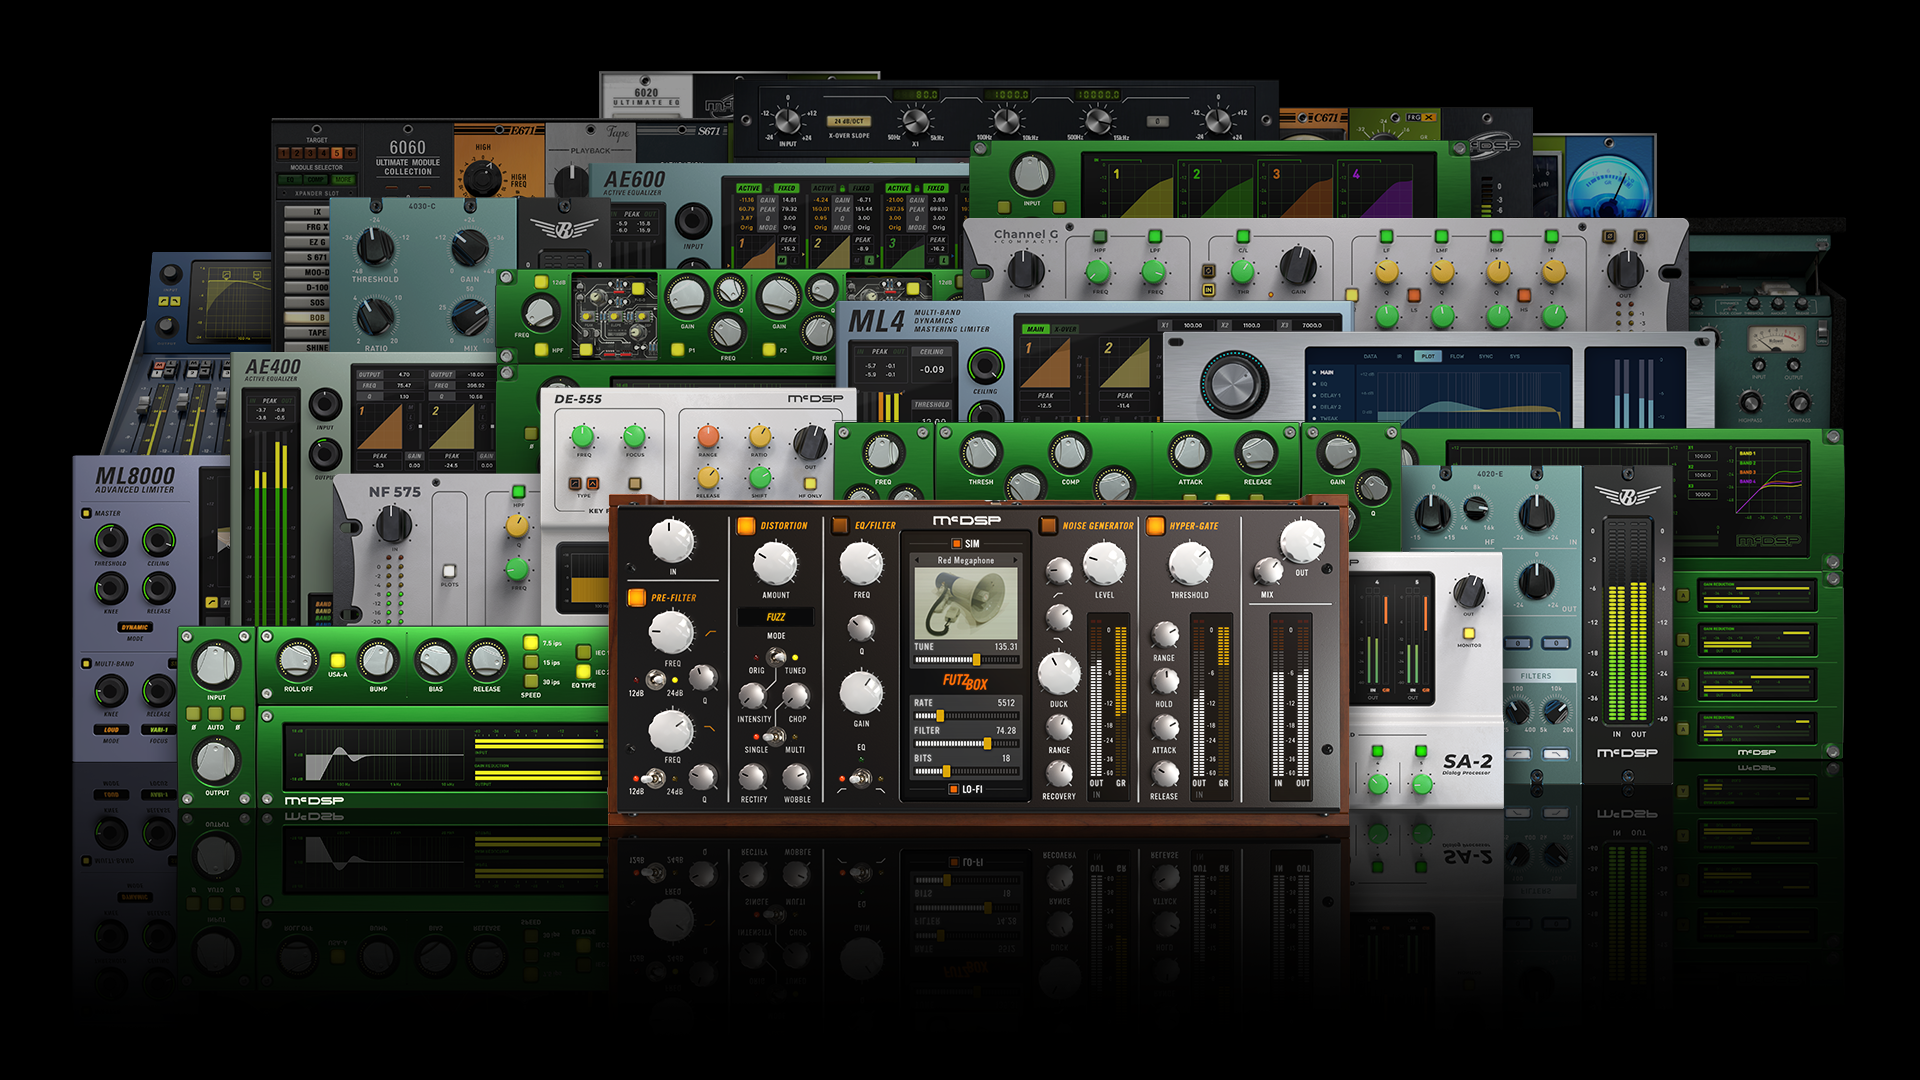 McDSP Any 3 McDSP Native plug-ins to Everything Pack Native v7.0